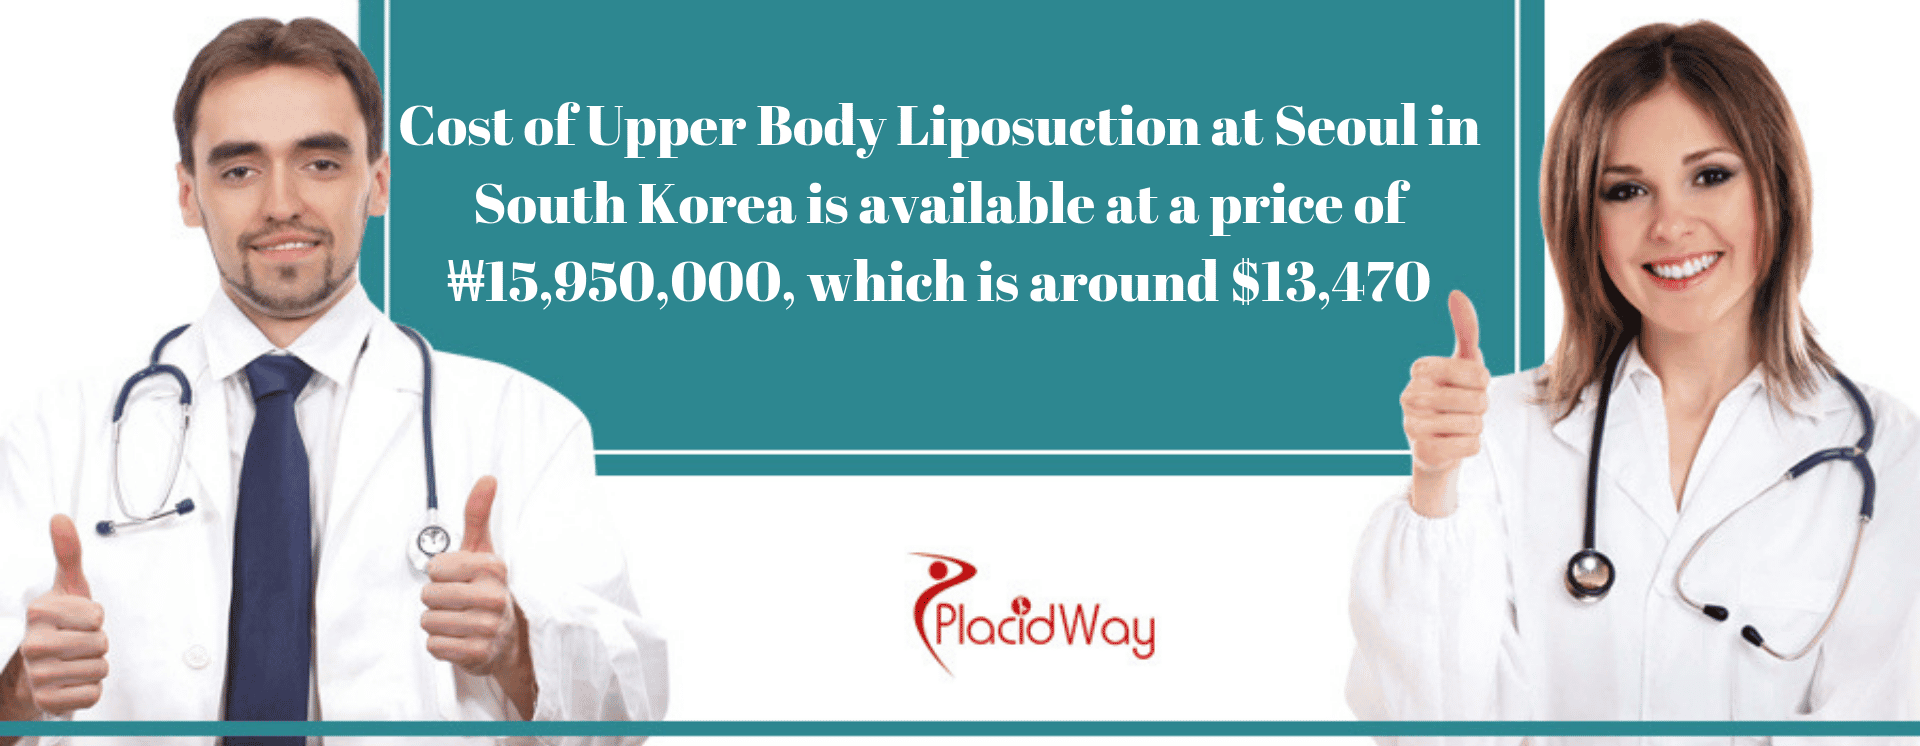 Cost of Upper Body Liposuction at Seoul in South Korea is available at a price of ₩15,950,000, which is around $13,470